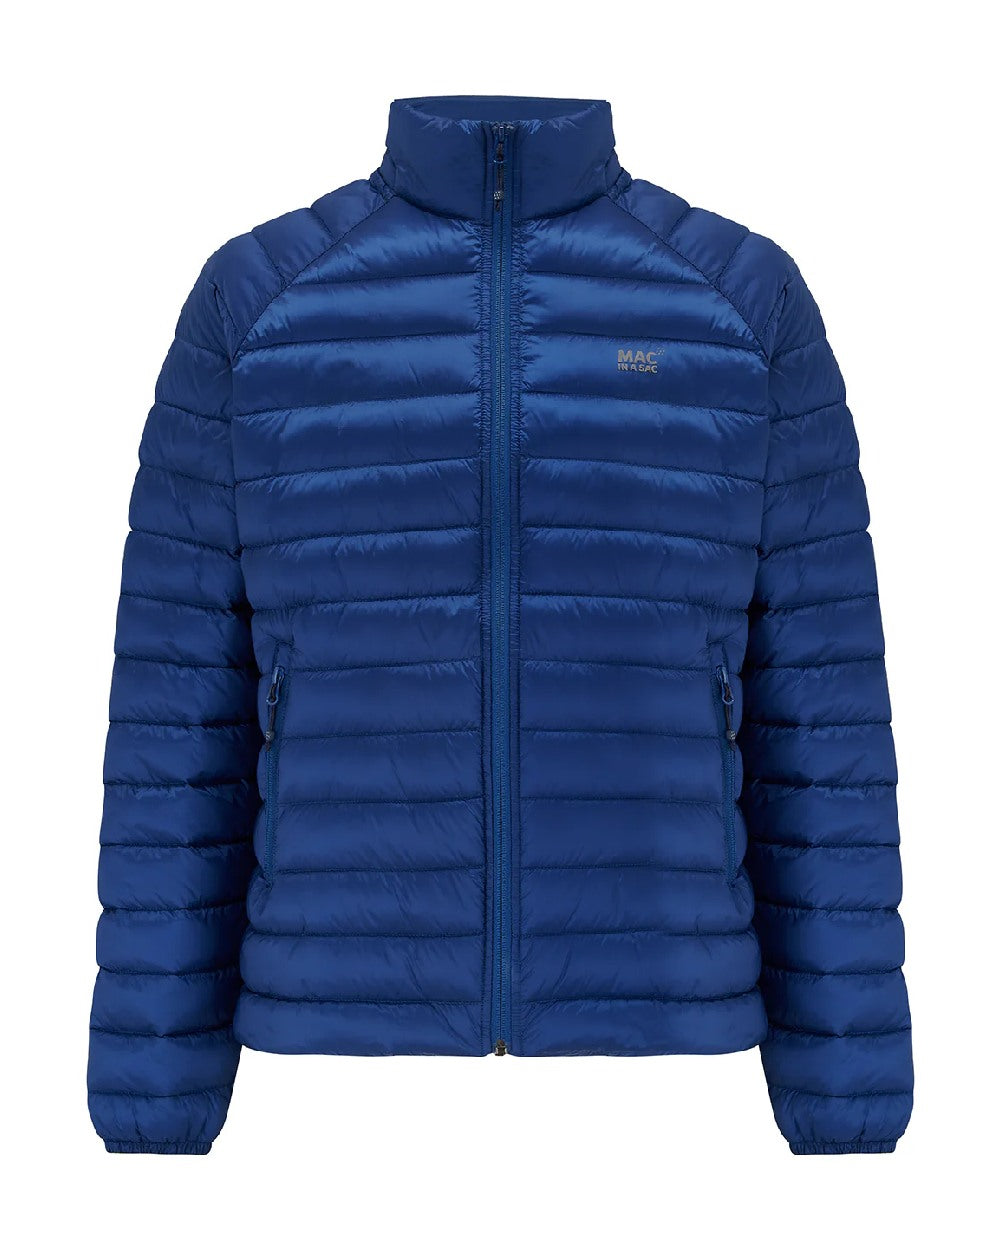 Blue coloured Mac In A Sac Mens Synergy Jacket on white background 